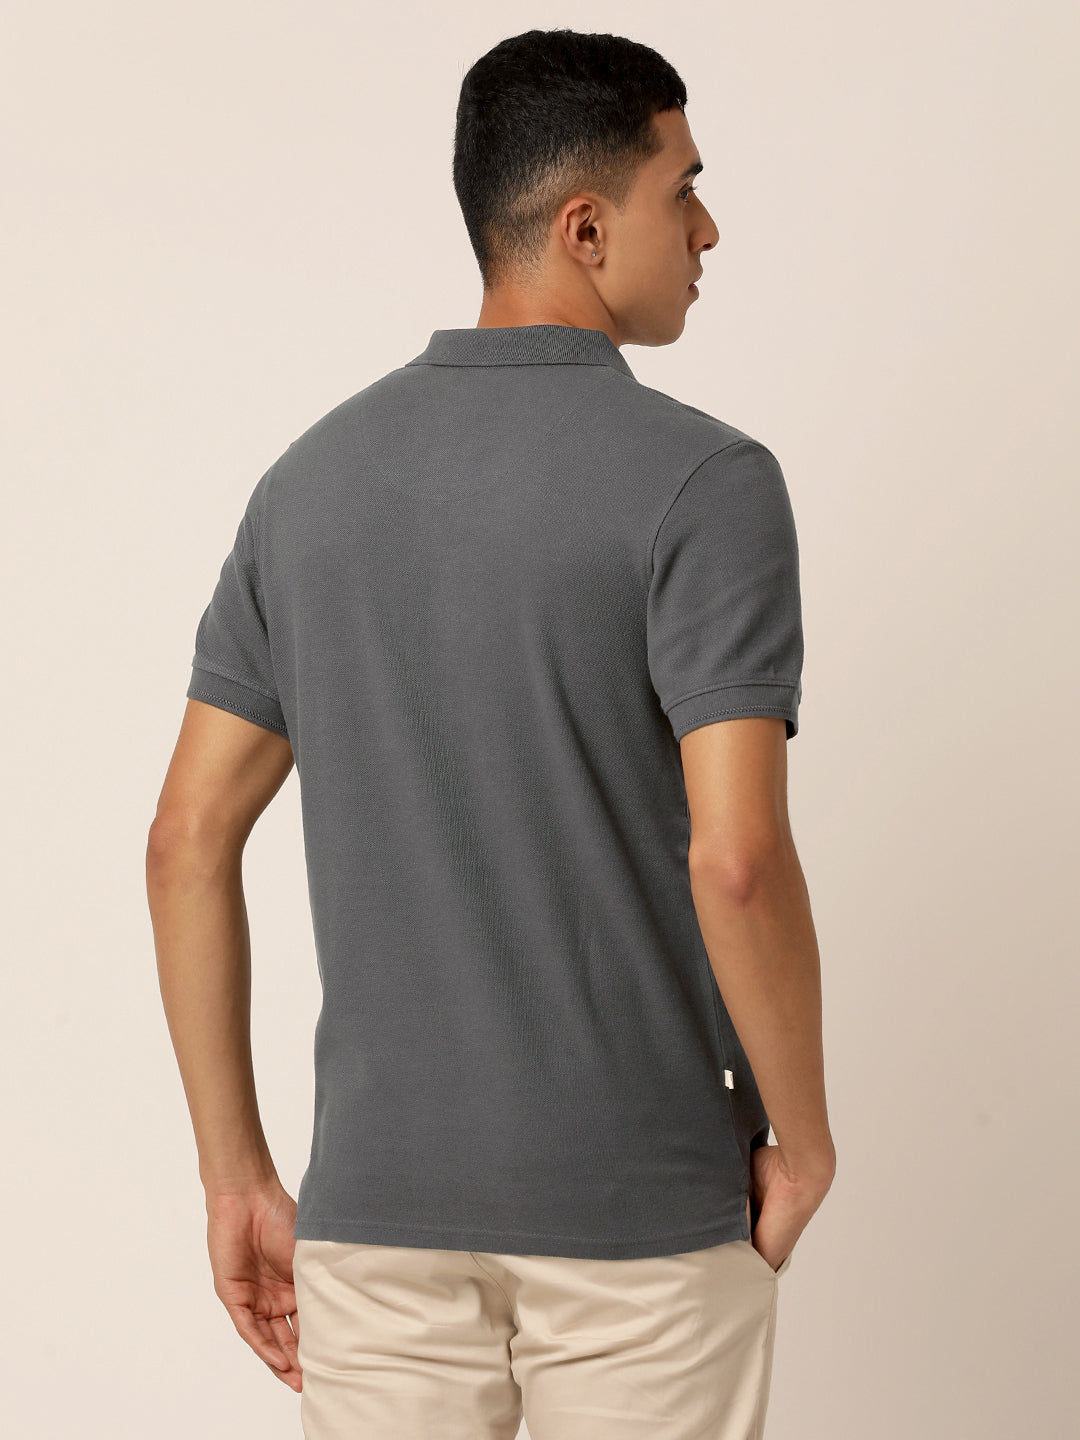 Charcoal Grey Polo Neck T-Shirt